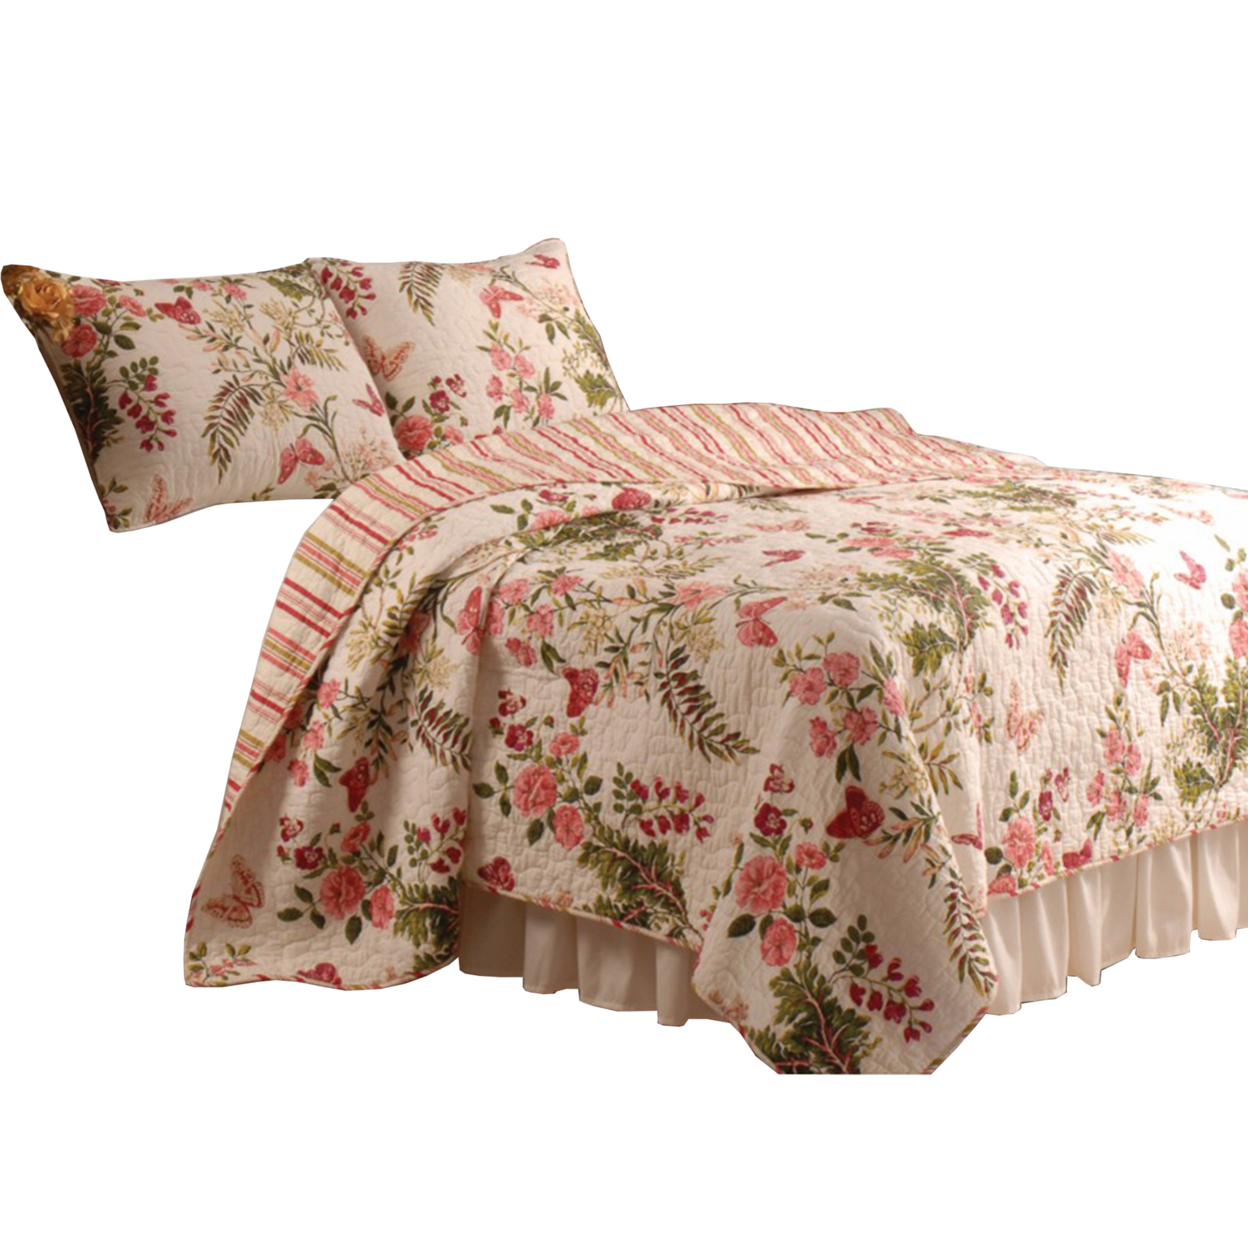 Atlanta Fabric 3 Piece King Size Quilt Set With Butterfly Prints,Multicolor- Saltoro Sherpi